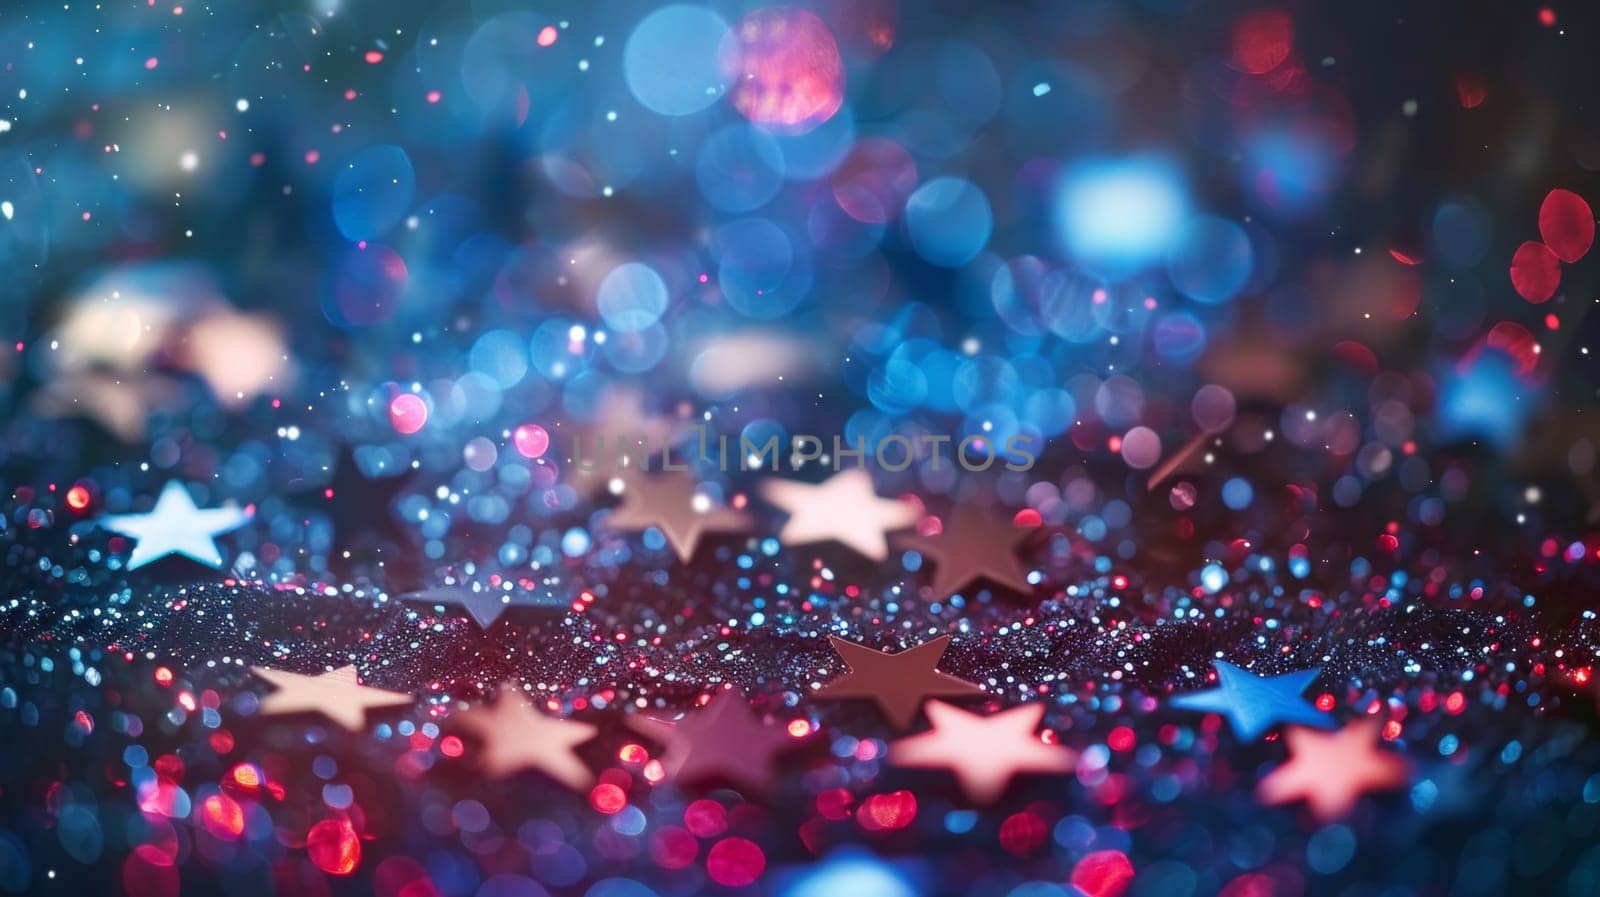 A blurry image of a bunch of stars on top of some glitter, AI by starush